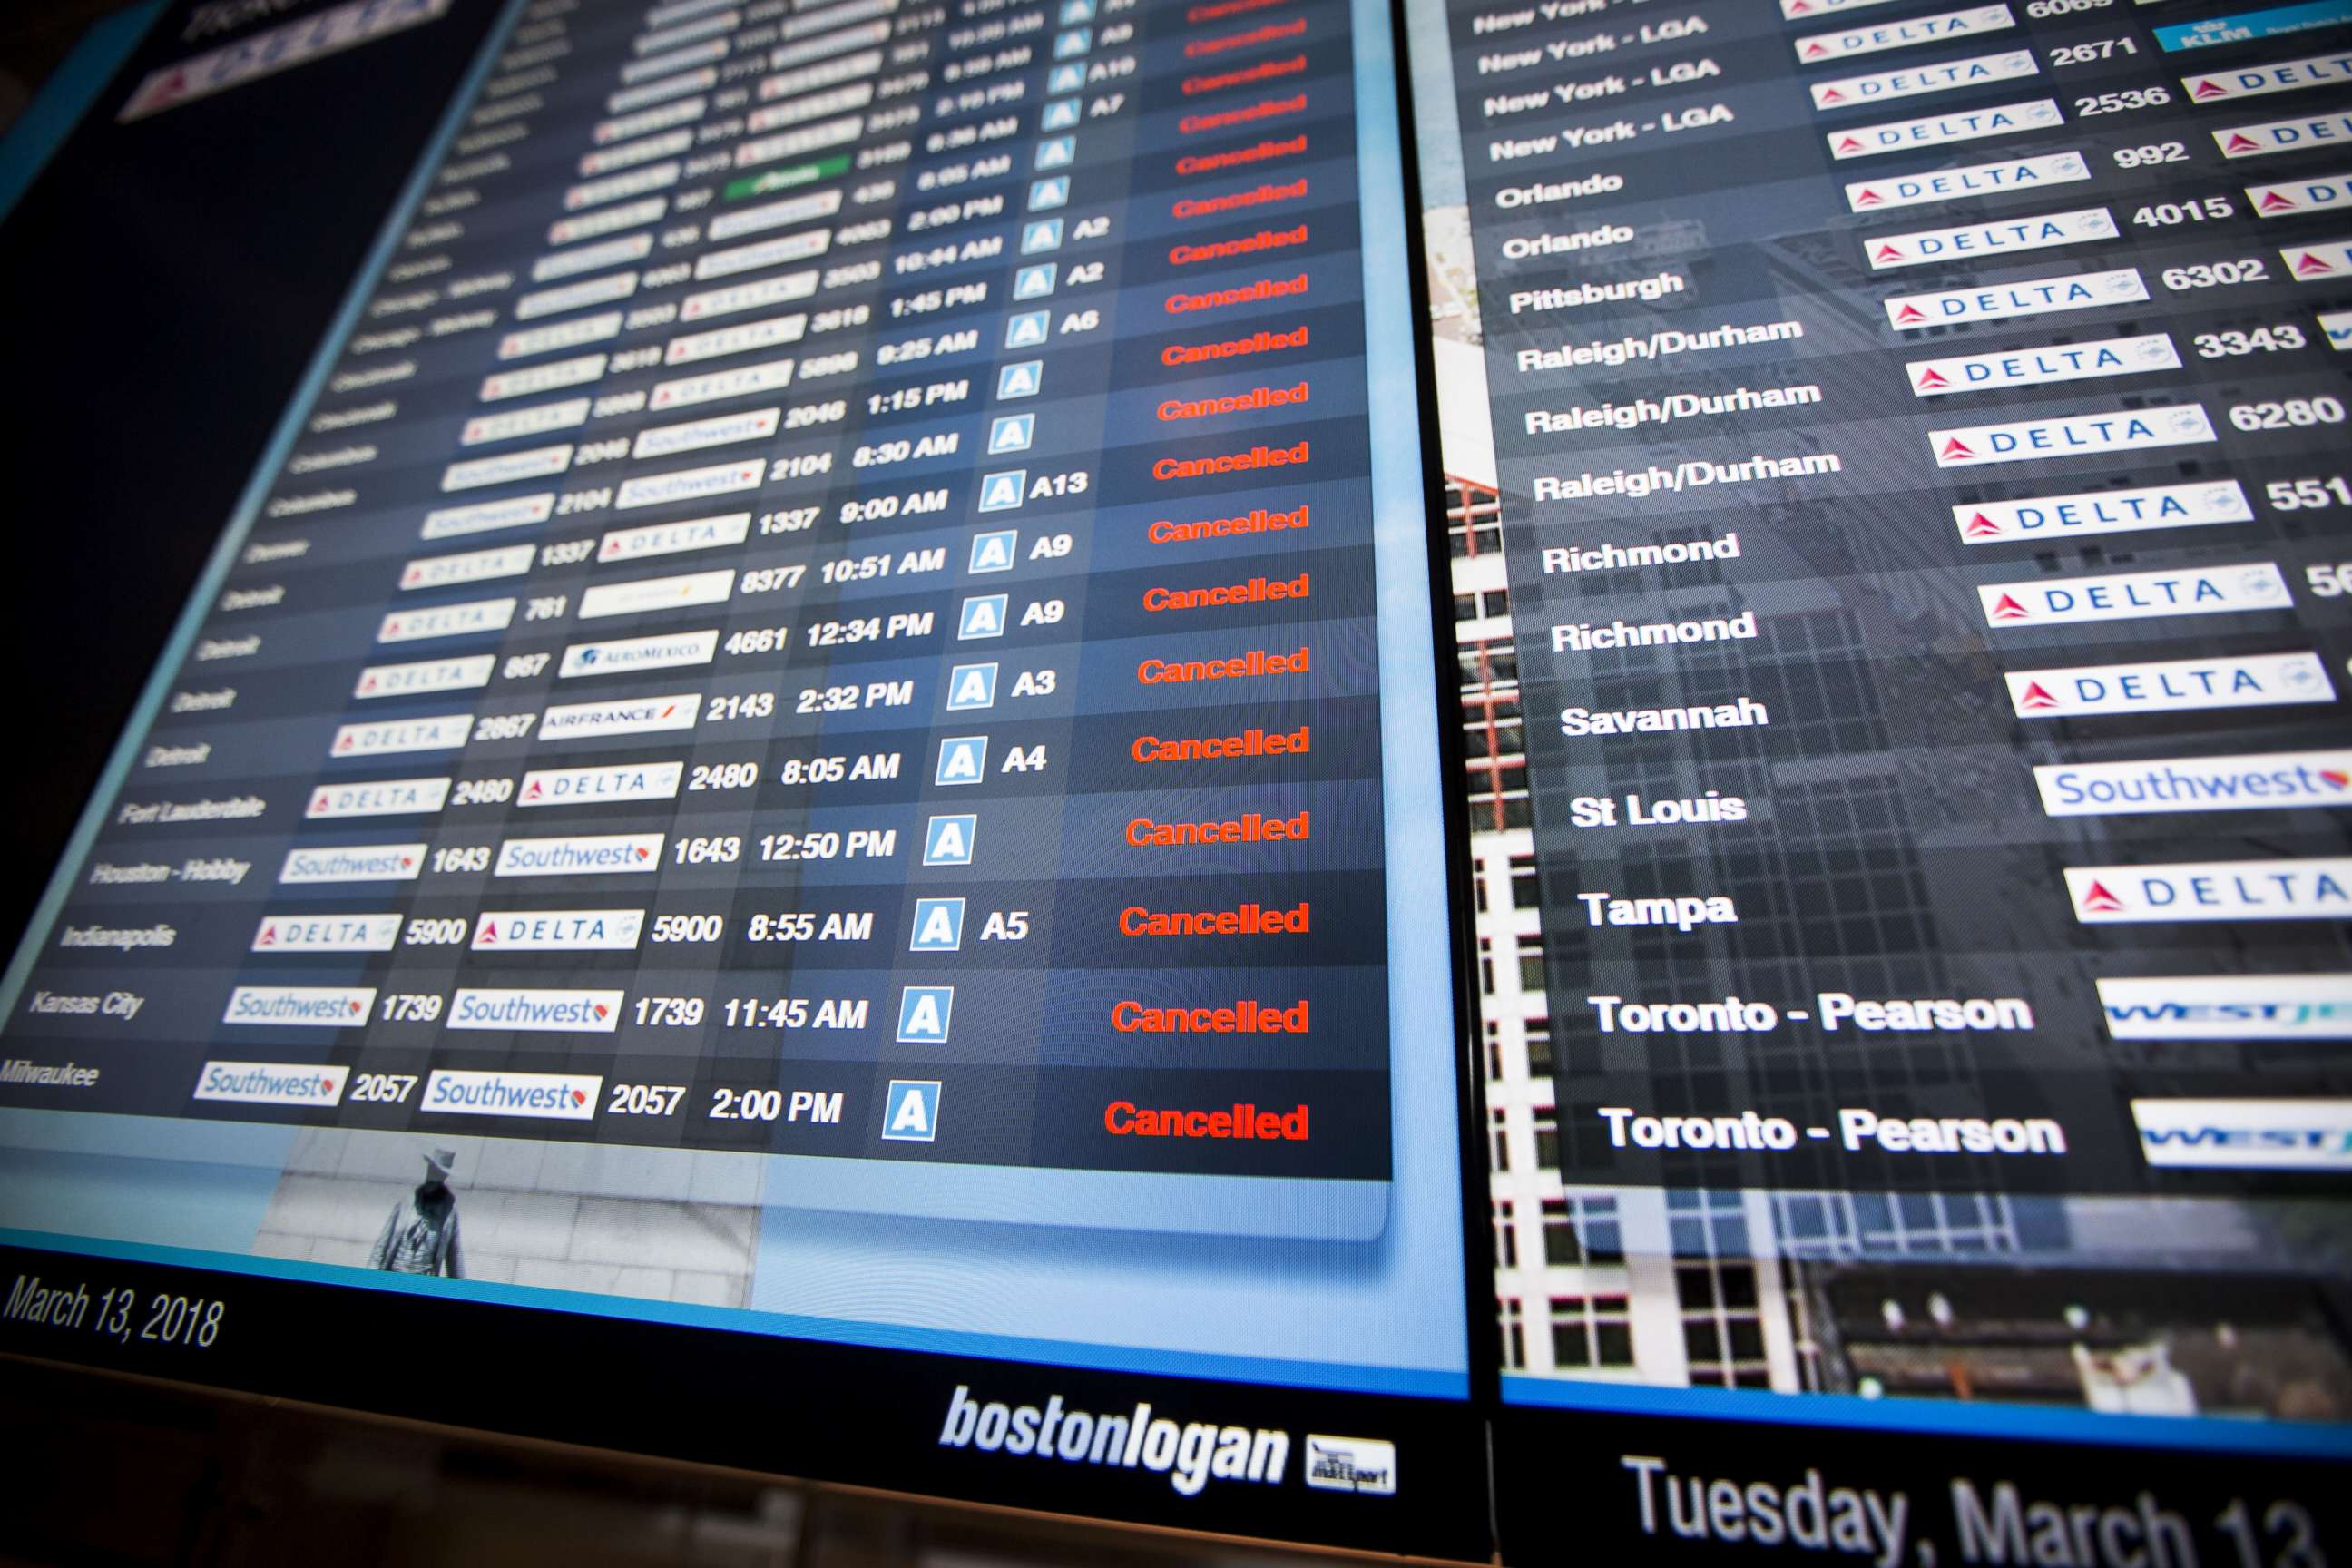 PHOTO: Information boards at Logan International Airport show hundreds of cancelled flights as a winter storm bears down, March 13, 2018, in Boston.